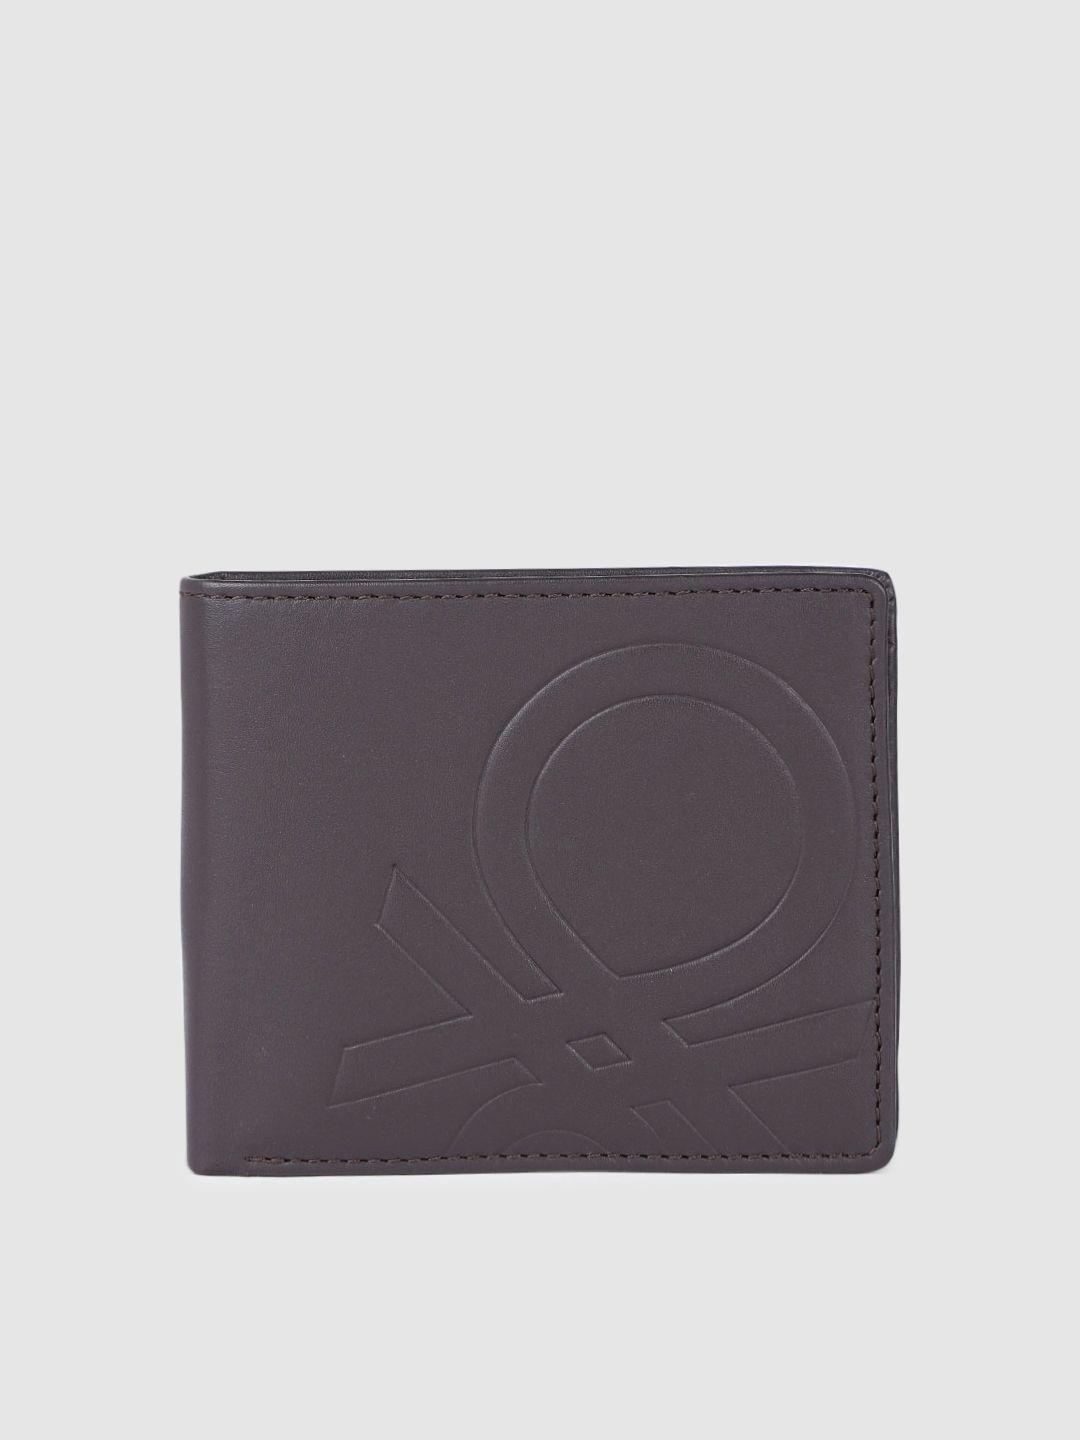 united colors of benetton men brand logo engraved leather two fold wallet